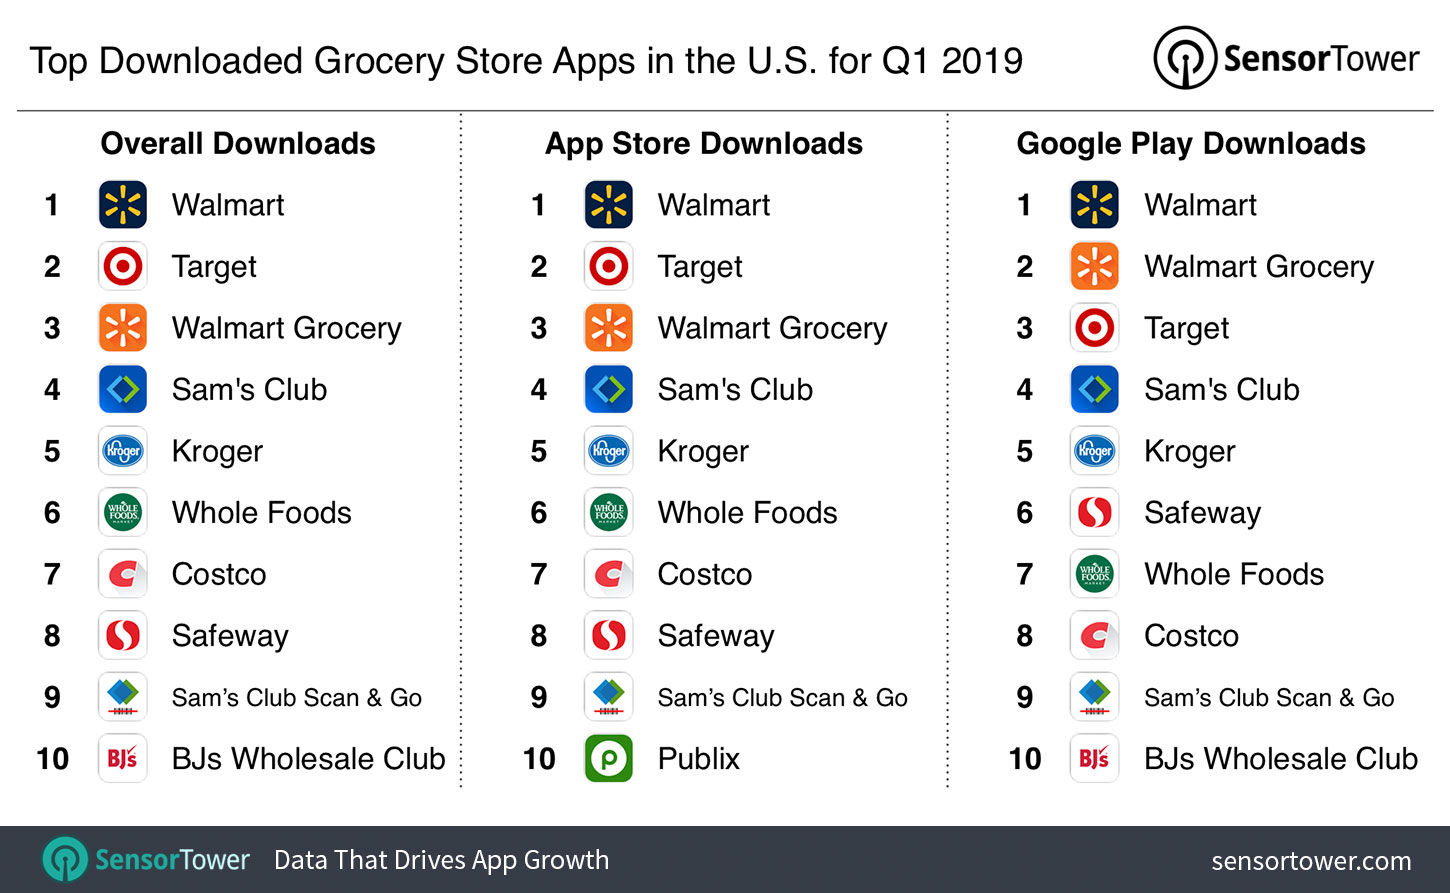 Top Grocery Store Apps in the U.S. for Q1 2019 by Downloads